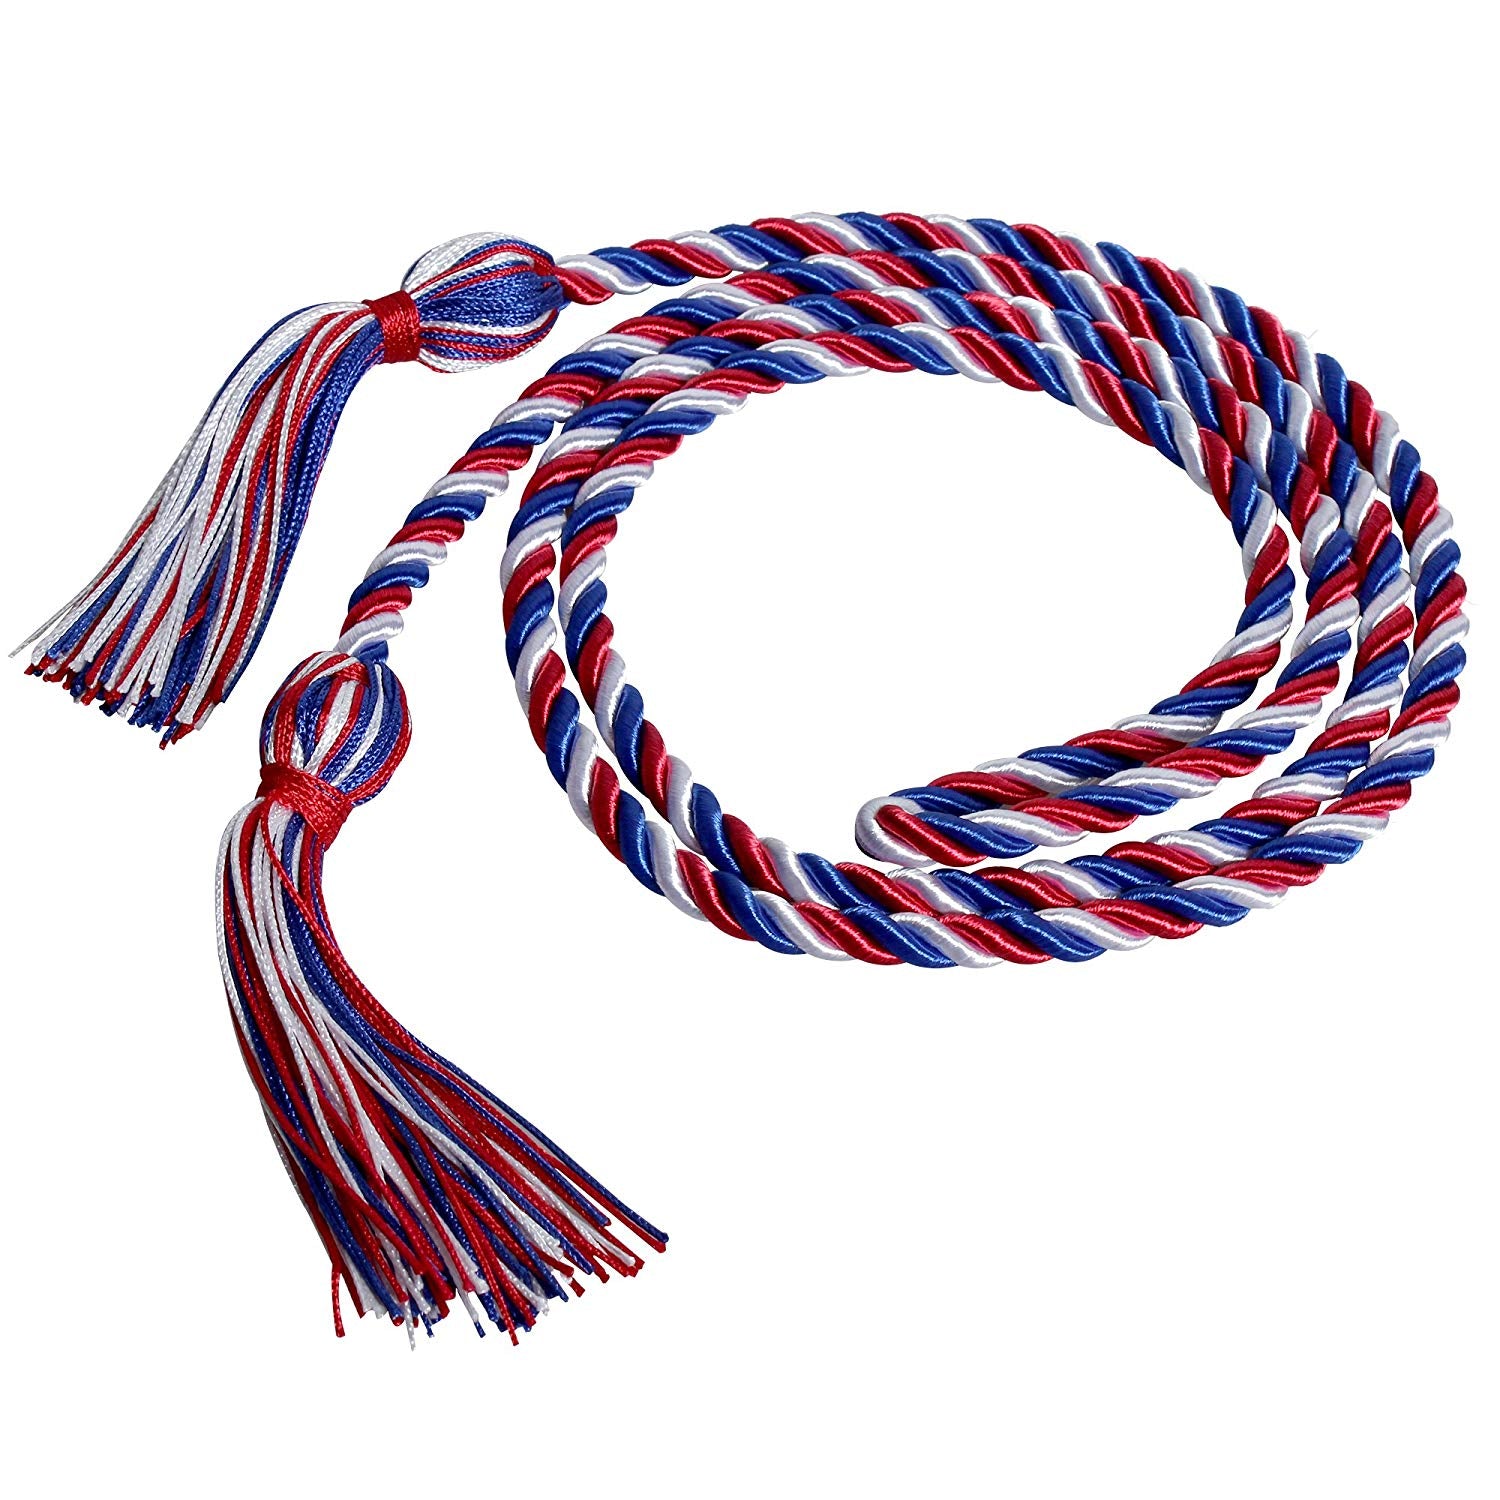 bgs honor cords